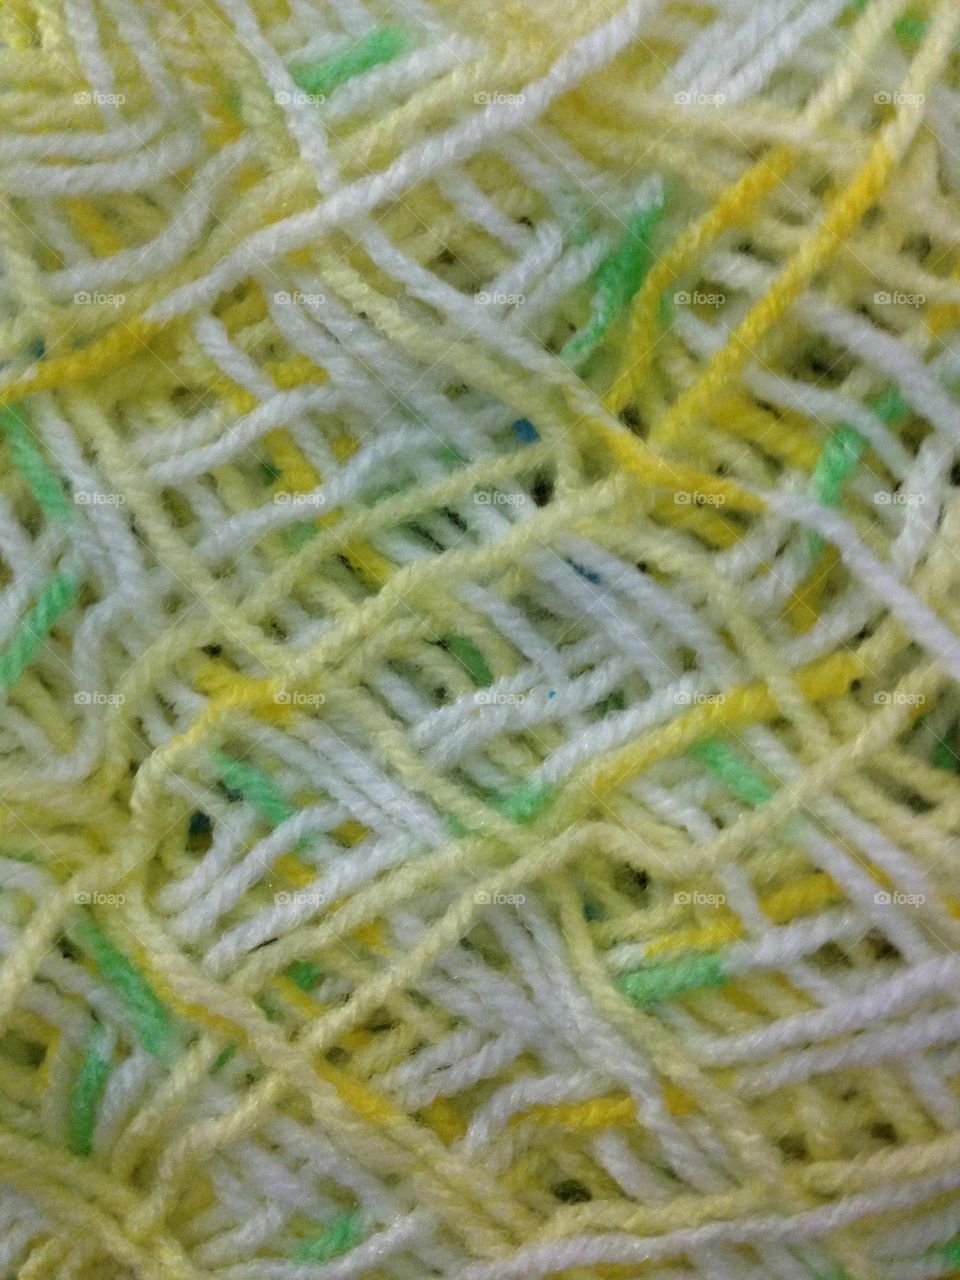 Close up of yarn with colours of yellow, green and white.